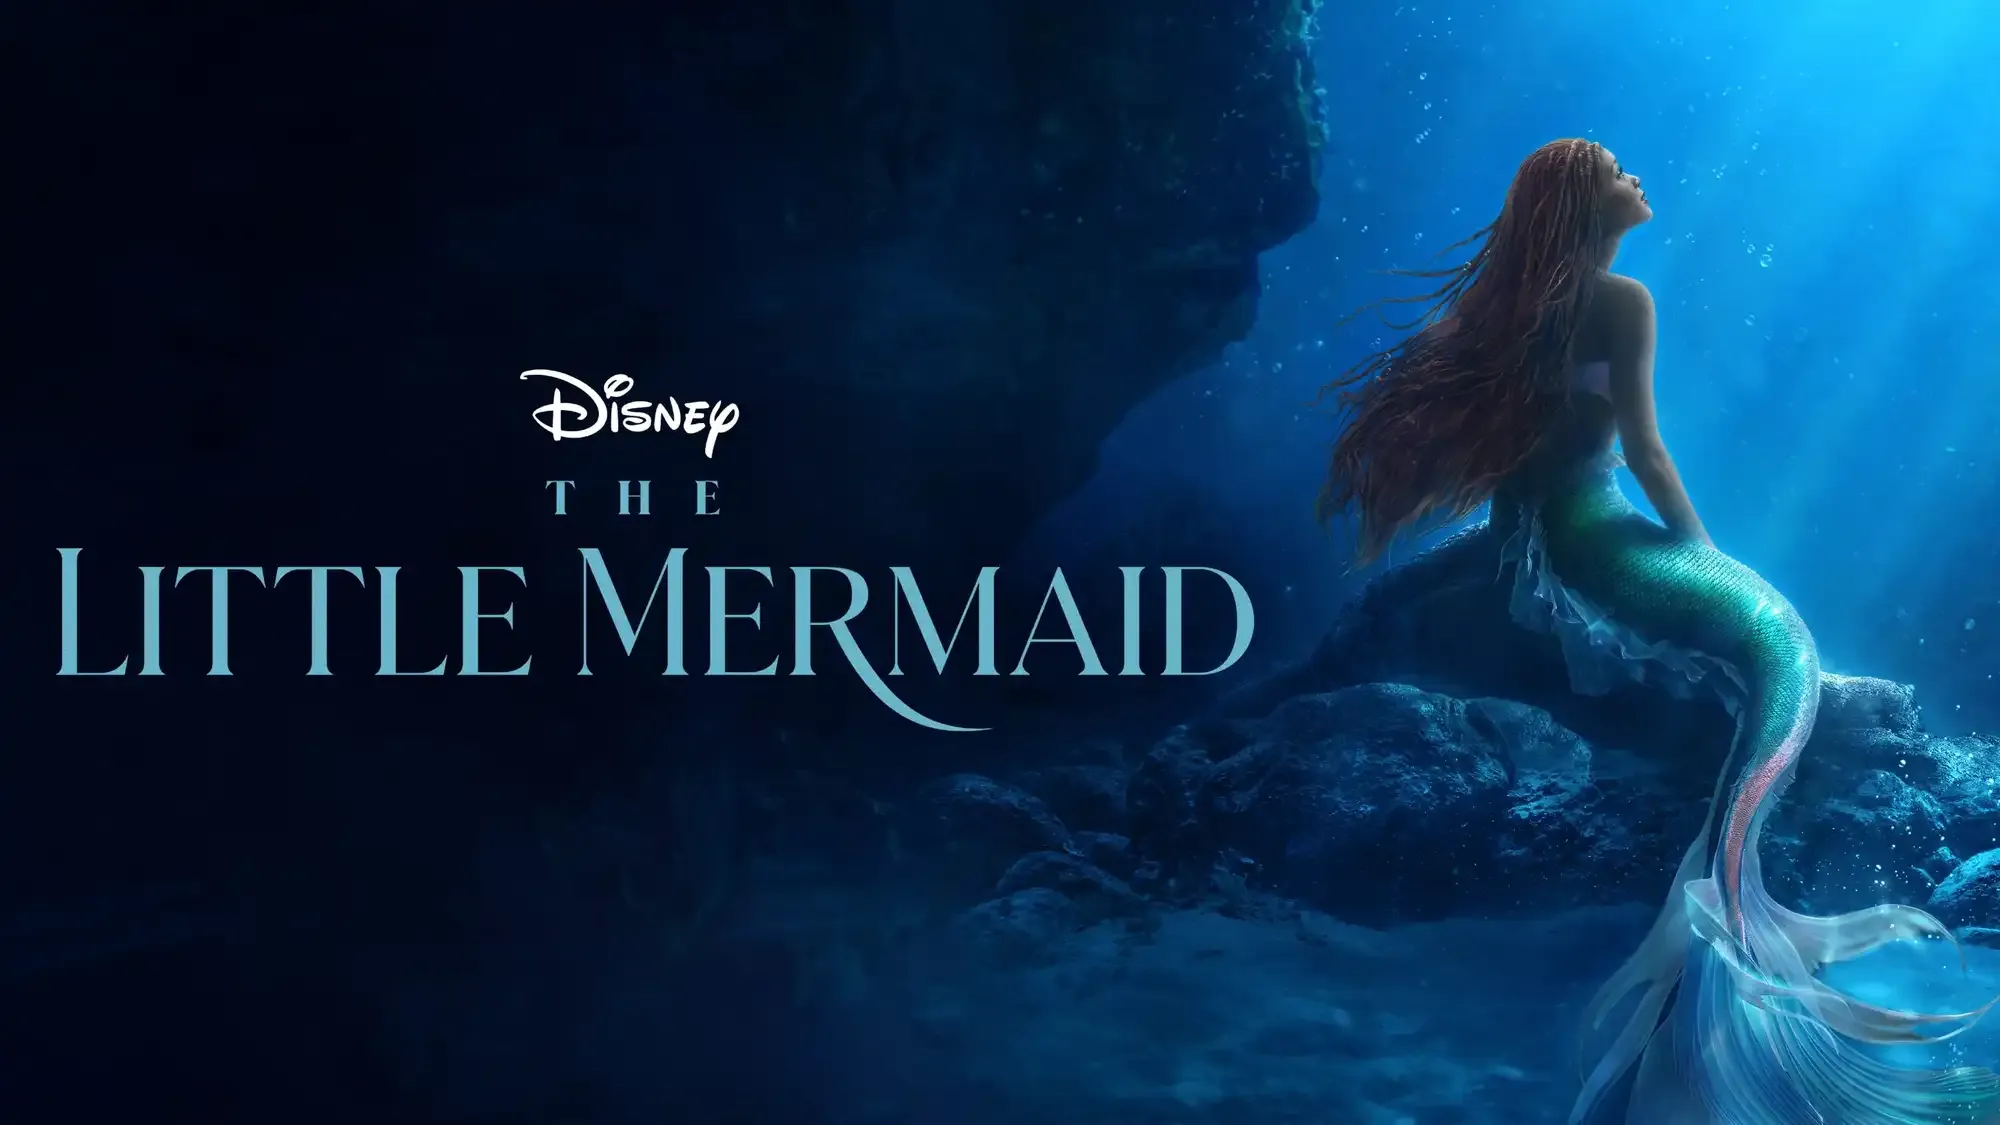 The Little Mermaid movie review